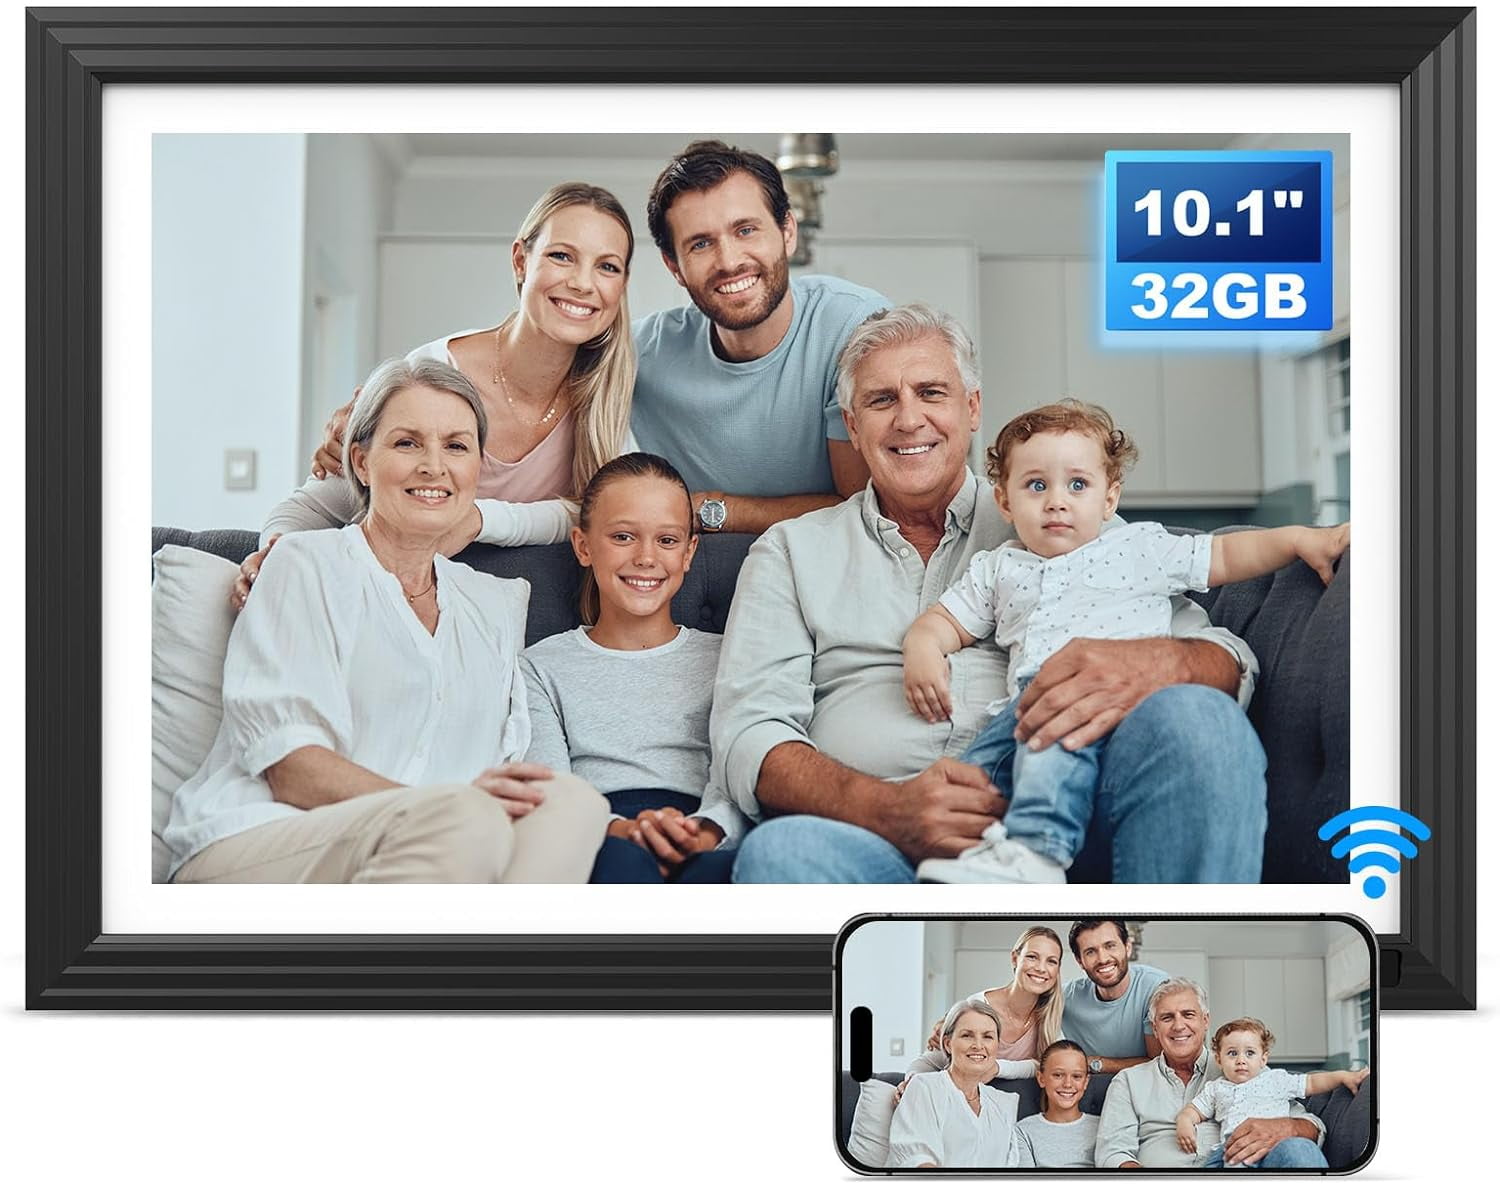 GIROOL WiFi Digital Picture Frame, 10.1Electric Smart Touch Screen Photo  Frame, 32GB Memory IPS Cloud Frame, Auto-Rotate or Wall Mount, Send Photos  and Videos via free App, Best Gift Choice 